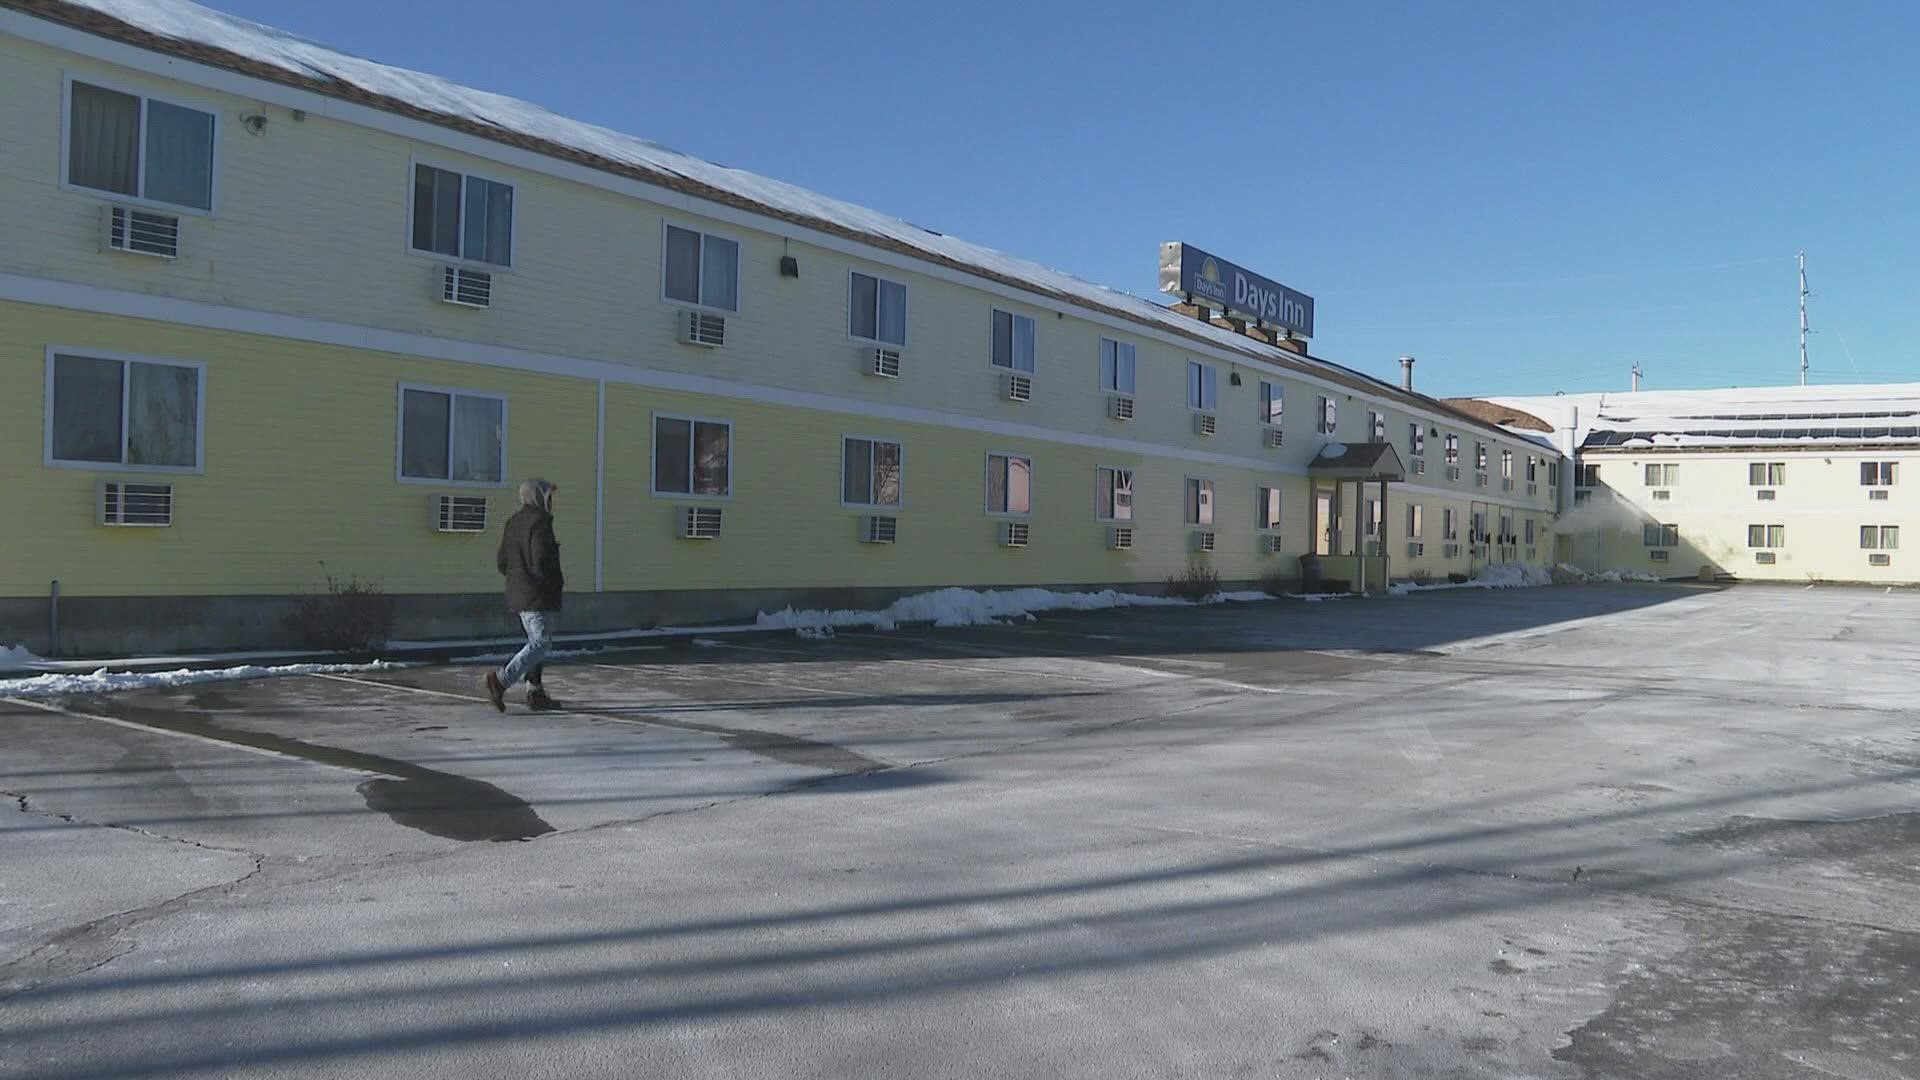 South Portland City Council voted to renew licenses with four hotels housing people experiencing homelessness or seeking asylum.